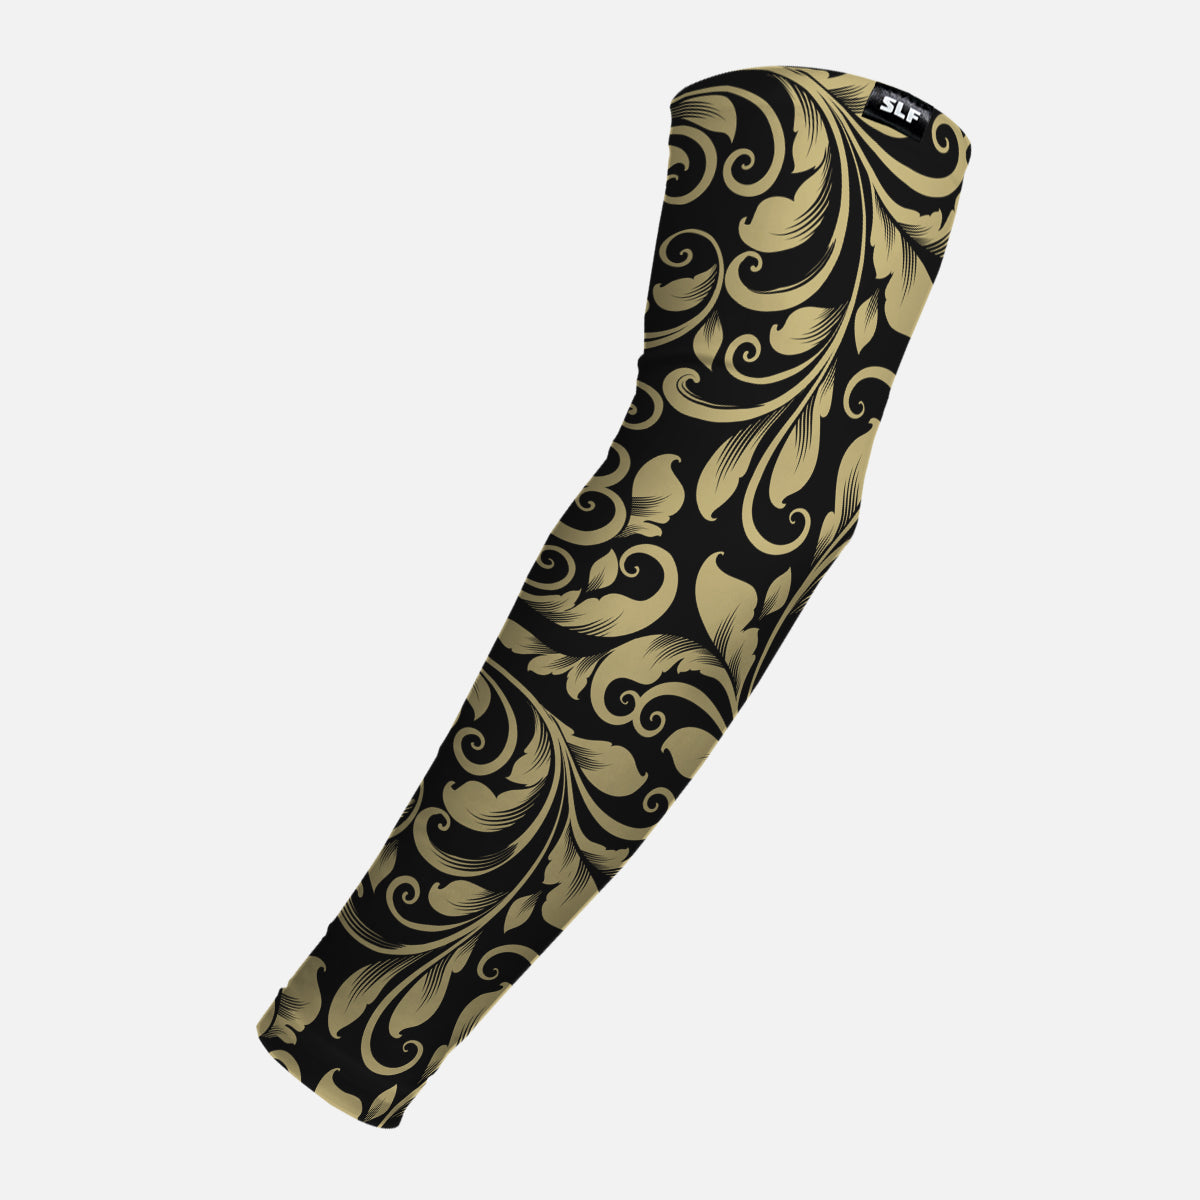 Baroque Old Gold and Black Arm Sleeve